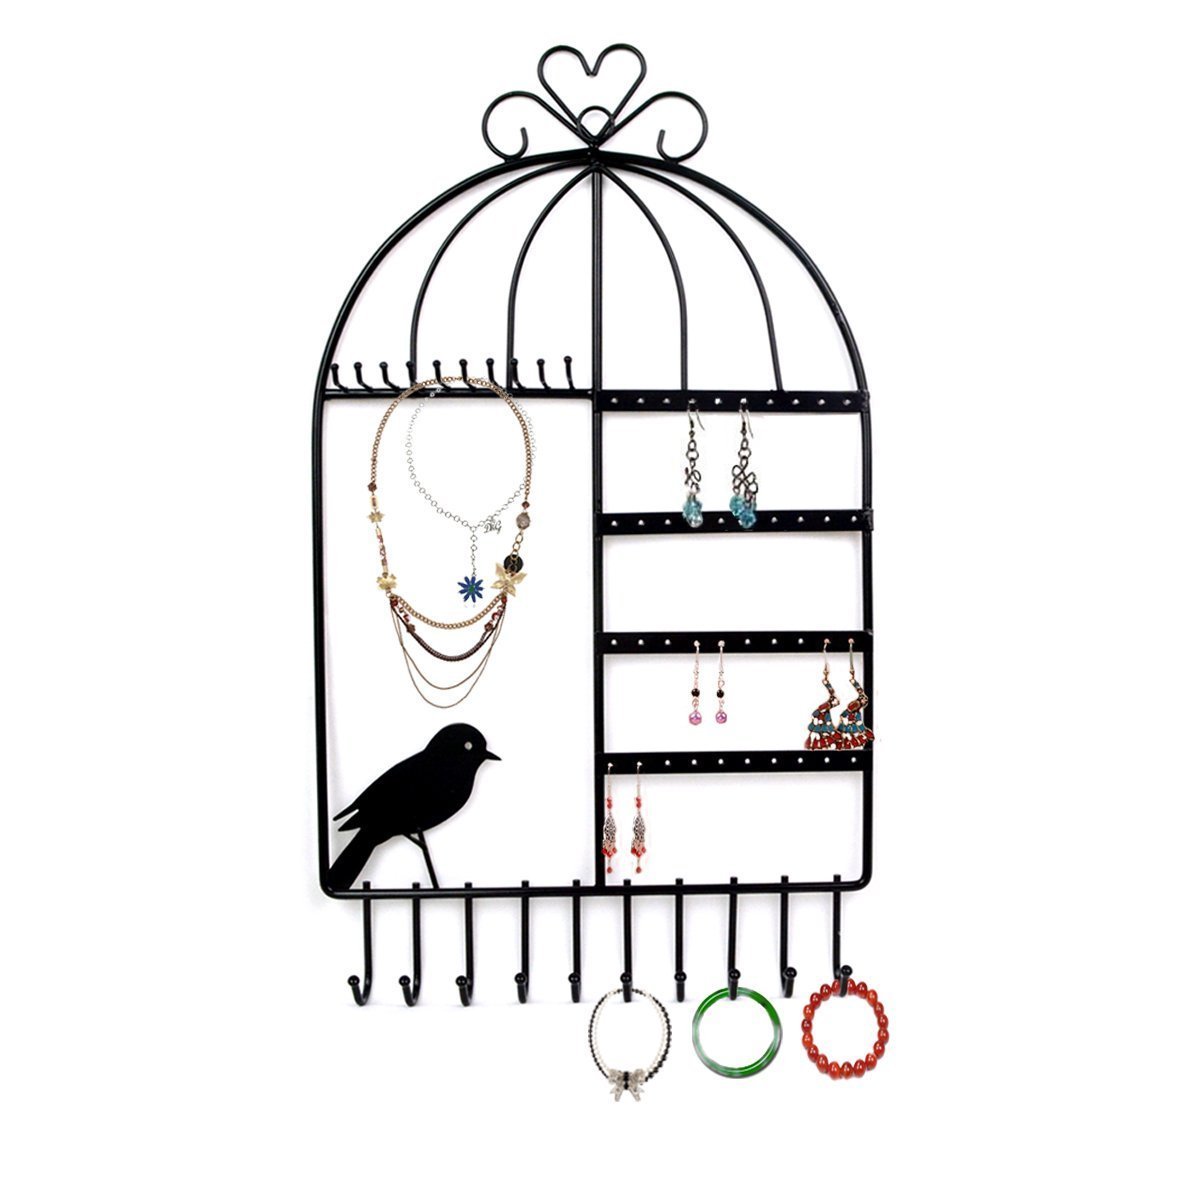 Open Birdcage Drawing at GetDrawings | Free download